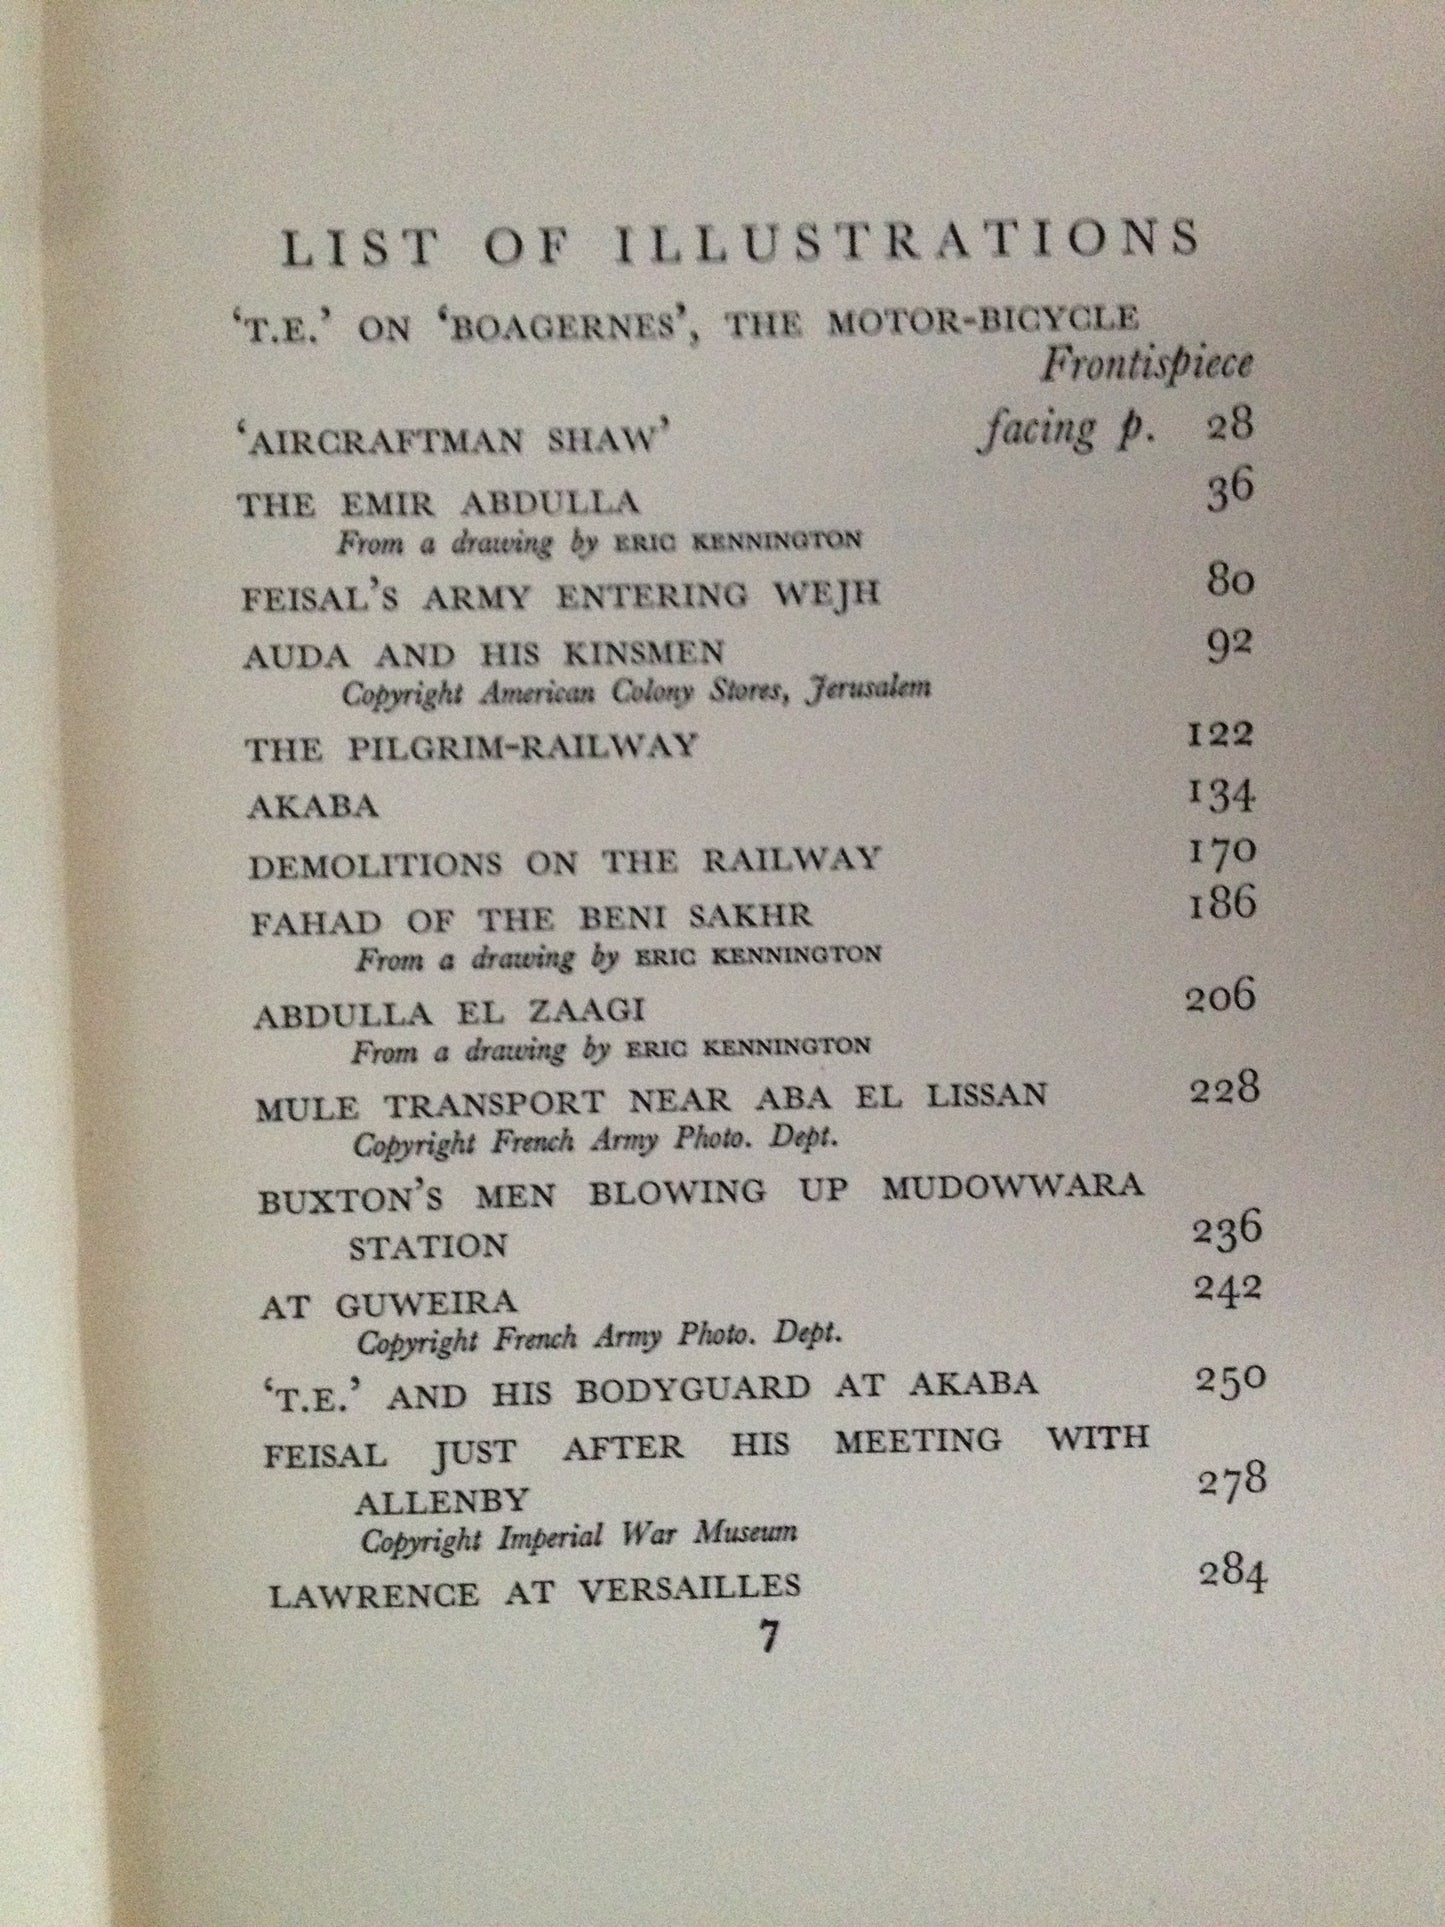 LAWRENCE AND THE ARABS - ROBERT GRAVES